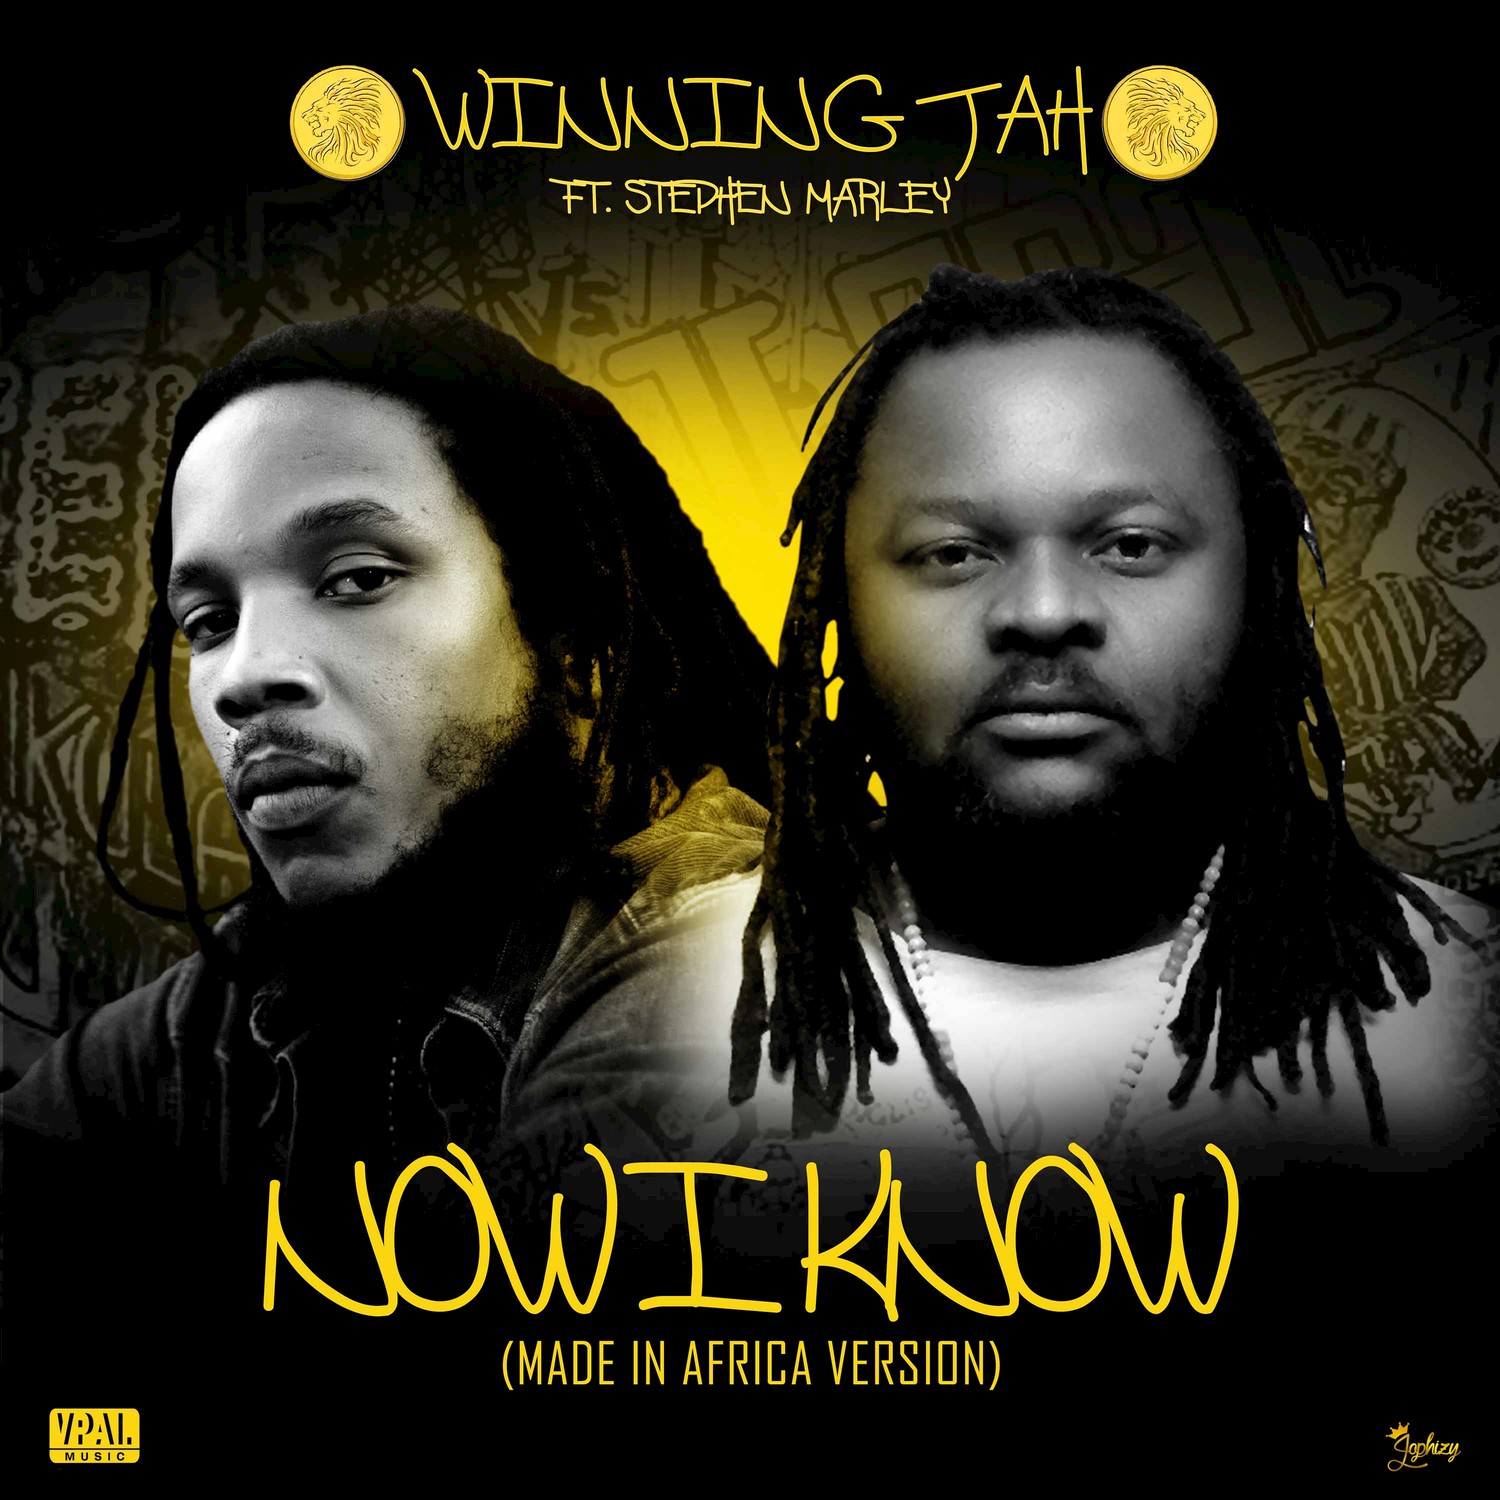 Now I Know (Made in Africa Version)